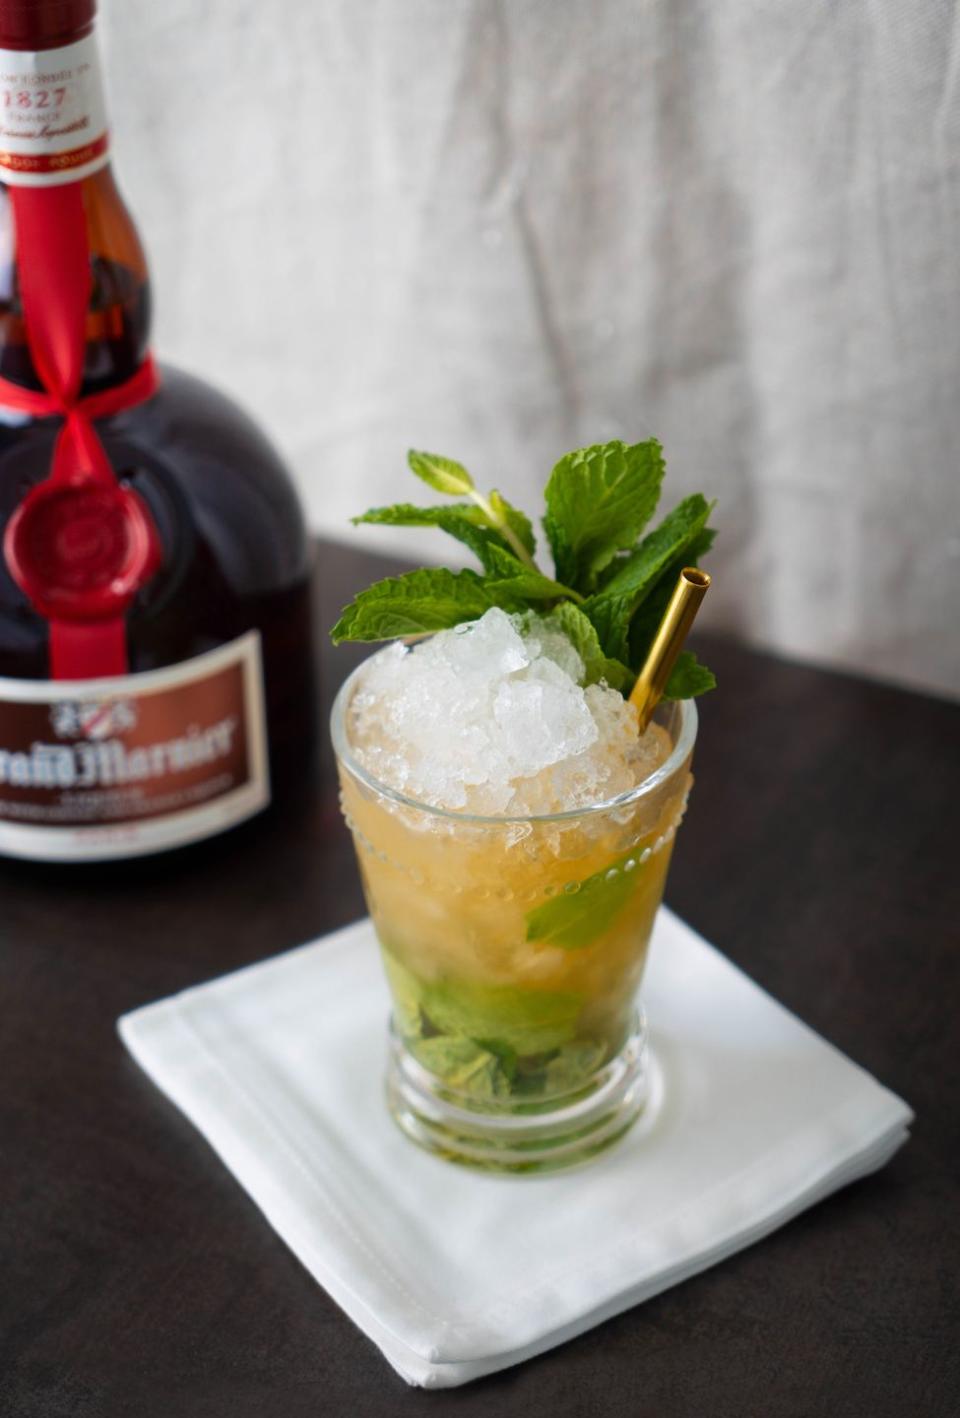 <p><strong>Ingredients</strong></p><p>2 oz Grand Marnier Cordon Rouge<br>10-15 mint leaves </p><p><strong>Instructions</strong></p><p>Slap the mint and set it inside the bottom of a rocks glass or julep cup. Add the Grand Mariner and gently muddle. Top with crushed ice to the top of the cup or glass until it forms a cone. Garnish with a bouquet of fresh mint<br></p>